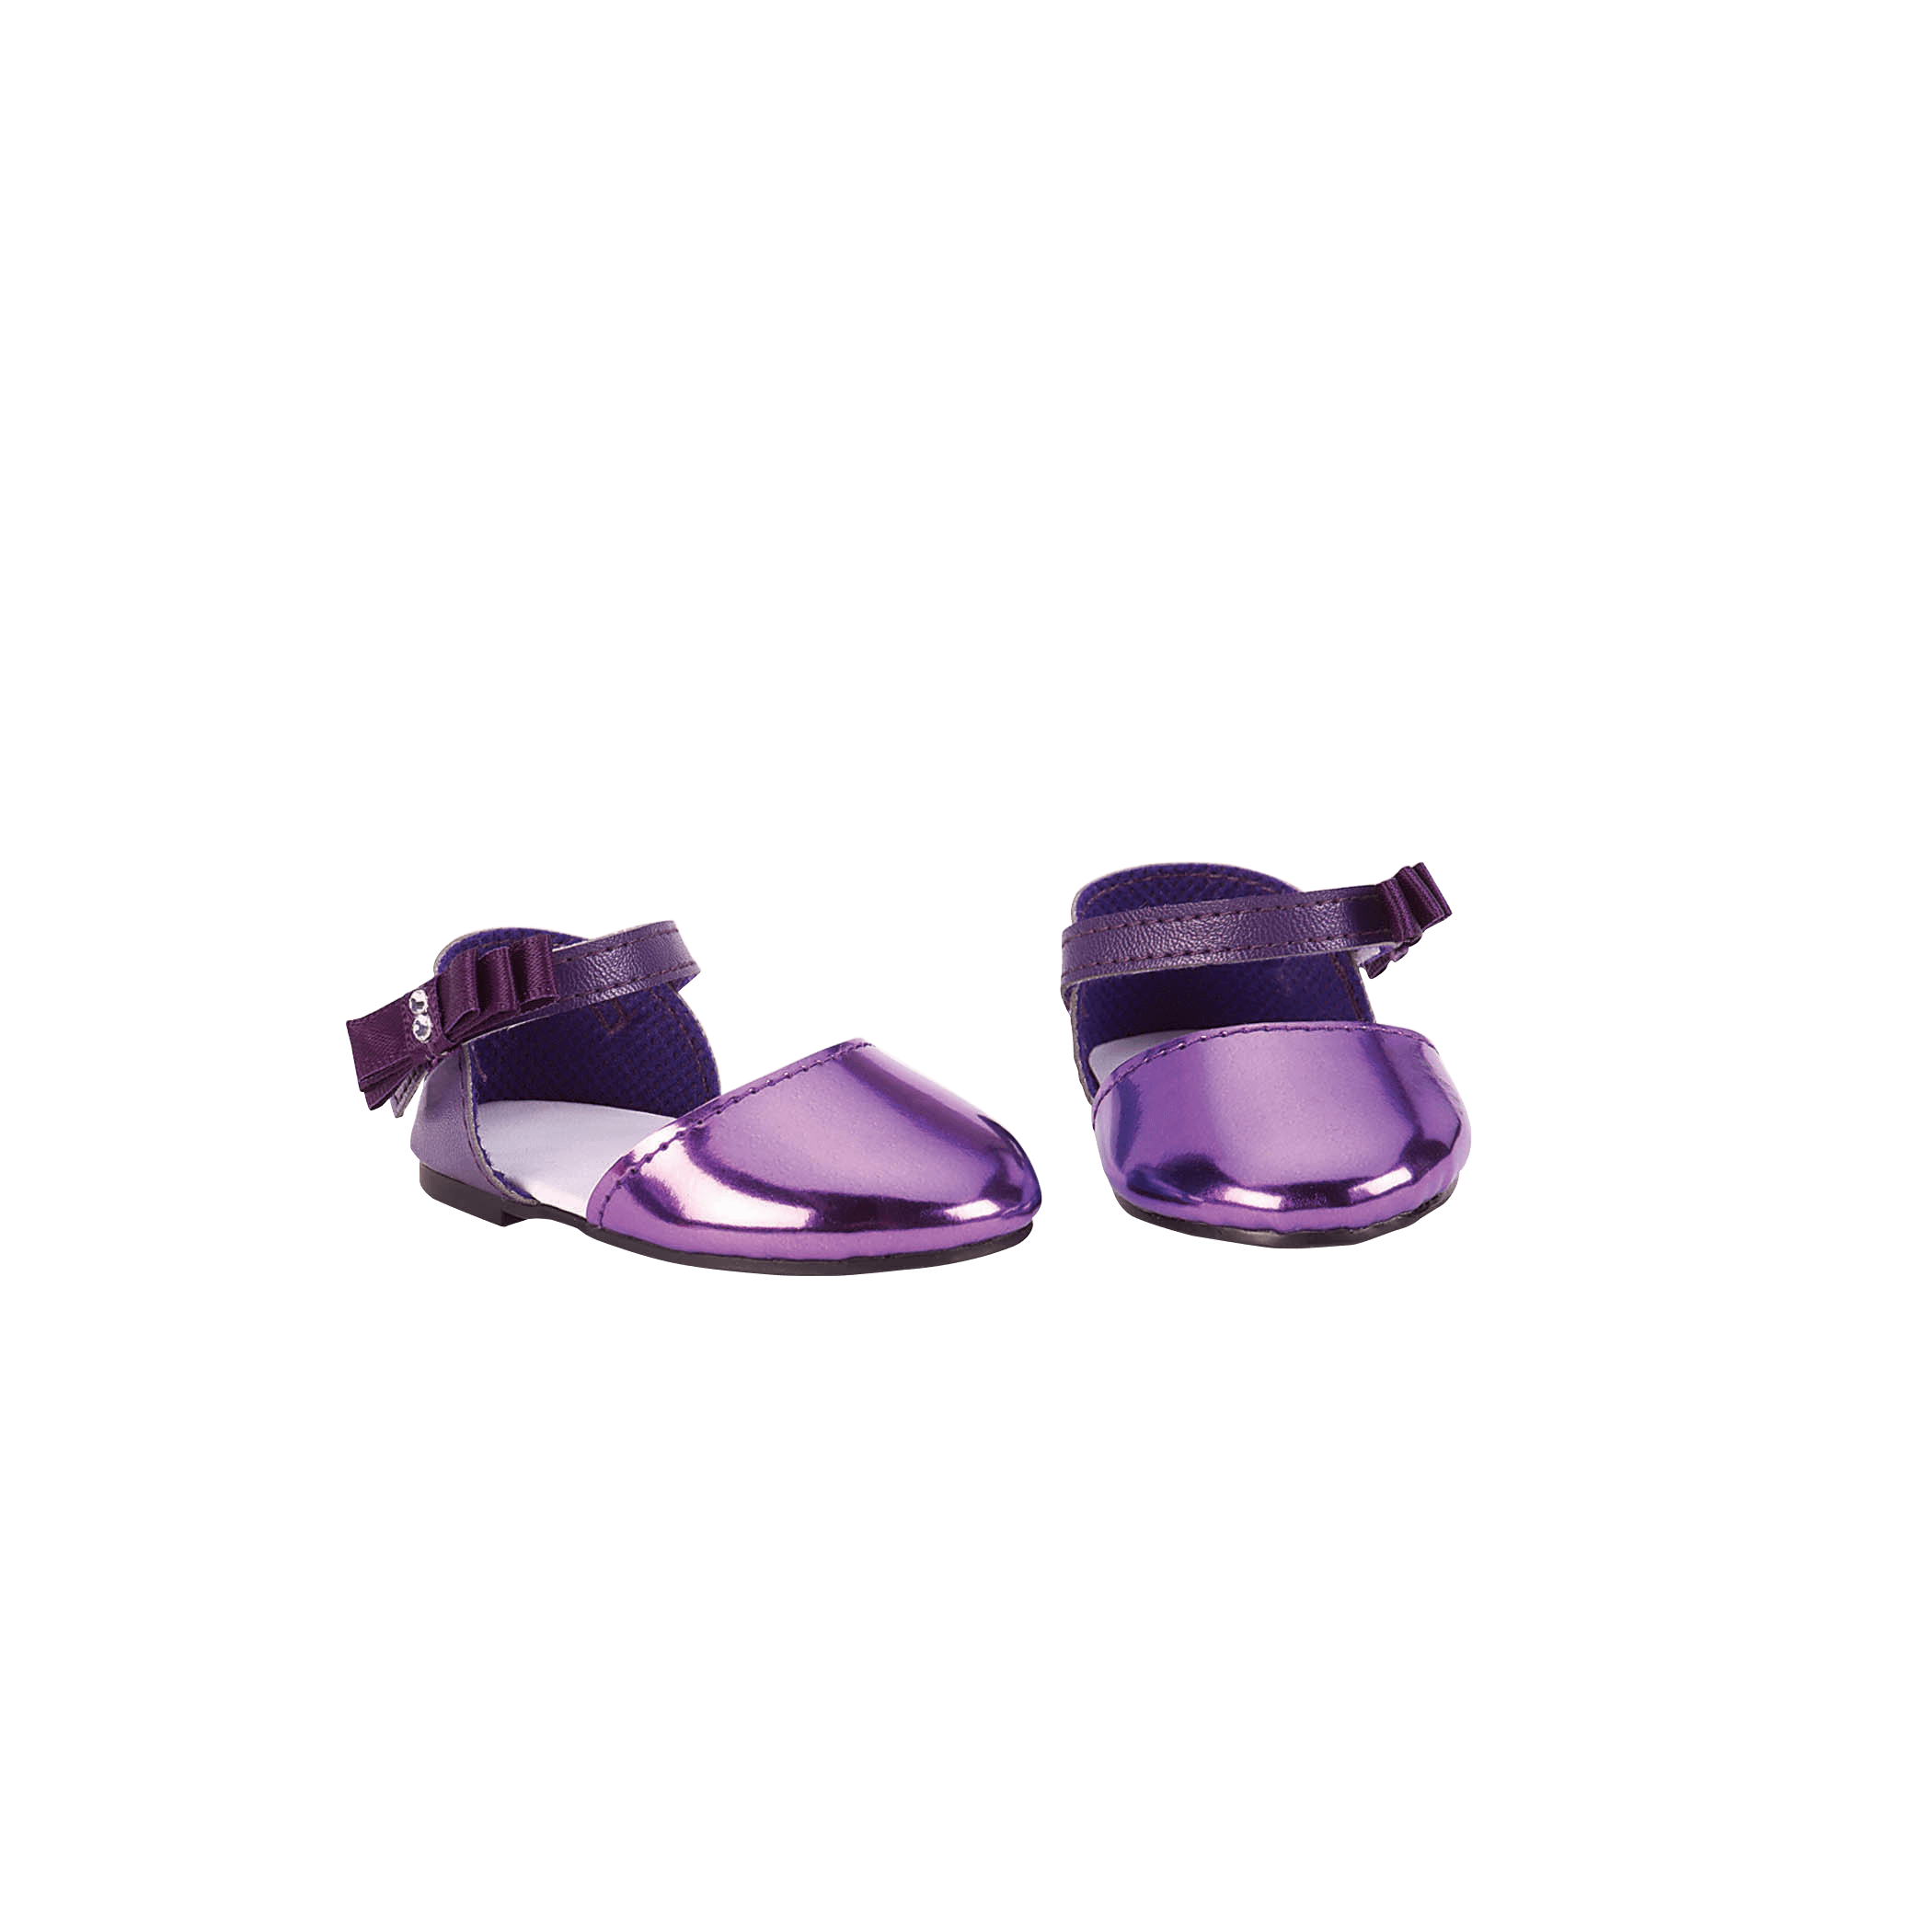 Patent Purple Fashion Shoes for 18-inch dolls